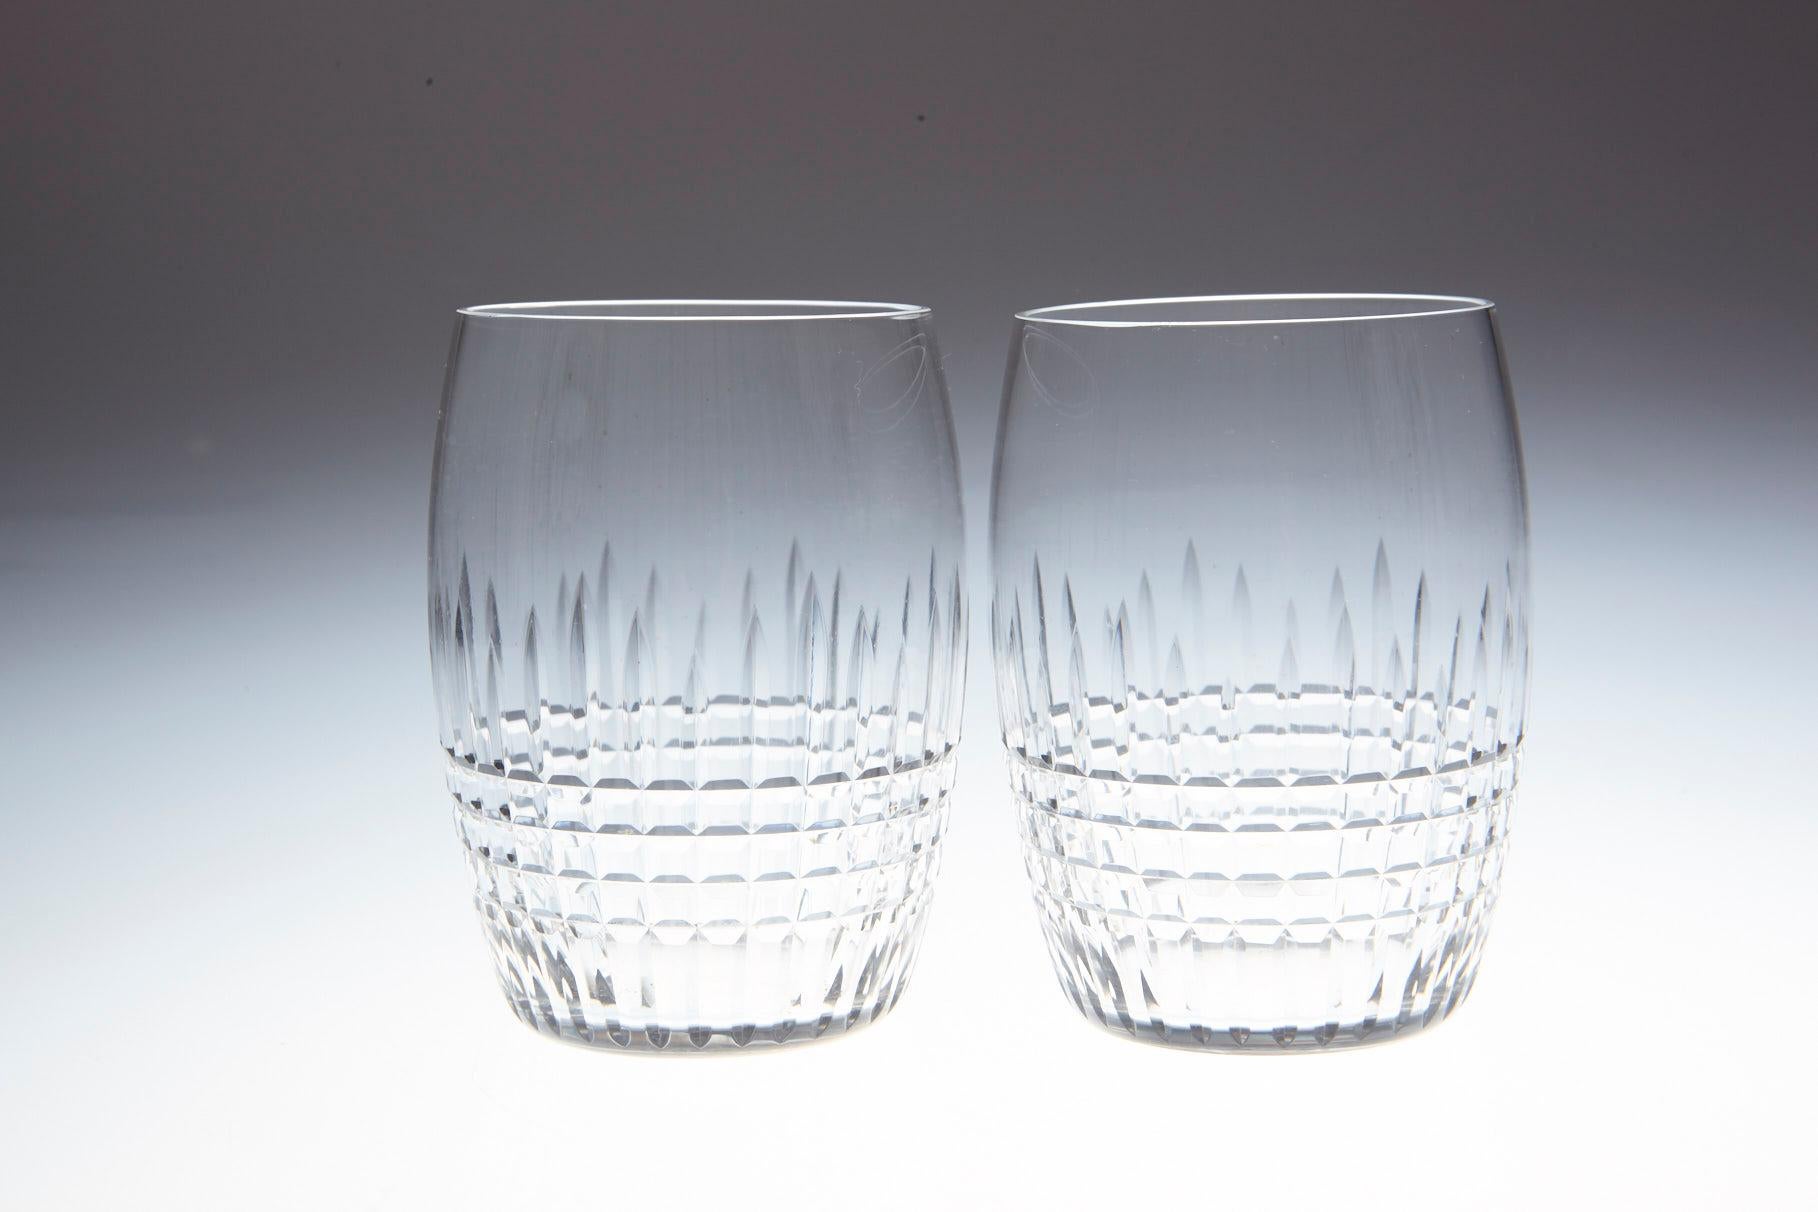 Rare set of 6 Baccarat crystal water glasses in the 'Nancy' pattern.
This classical shape with finely banded vertical and horizontal cuttings is one of Baccarat Crystals most popular patterns, first created in 1909 but is discontinued